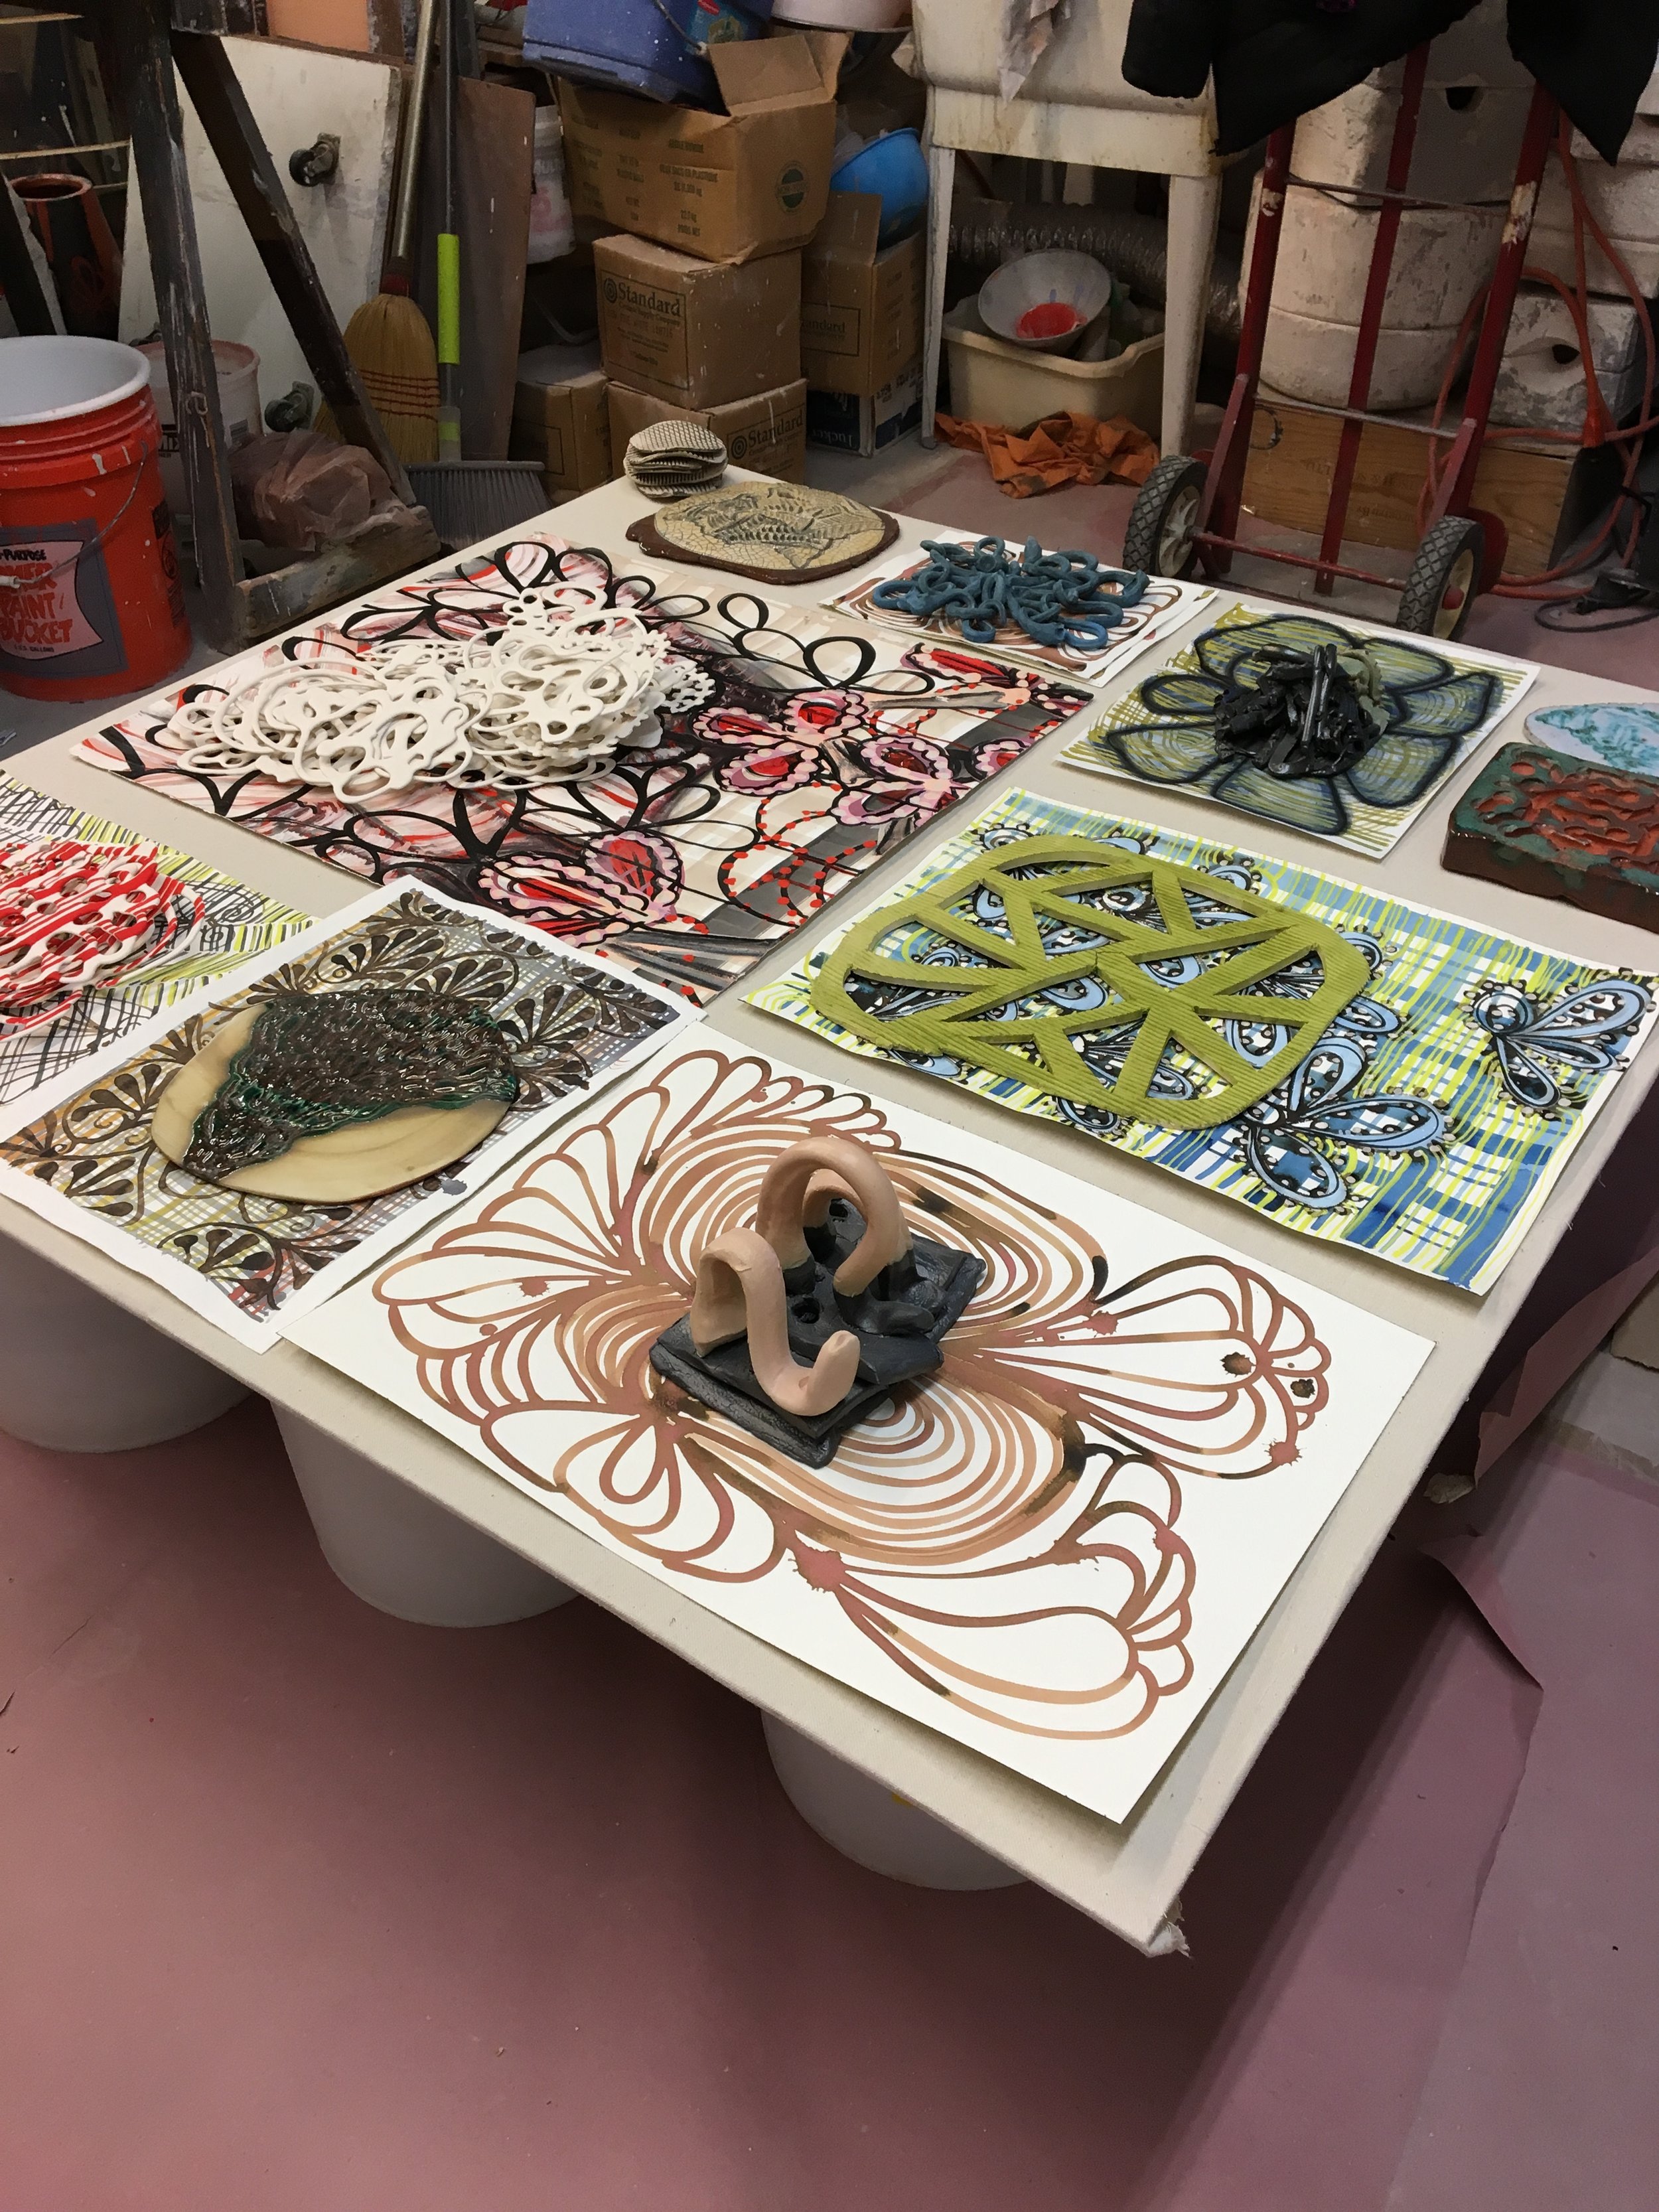  Paperweights is an open project of variable dimensions. Drawings are exhibited horizontally on a table with a variety of ceramic elements holding them down. Drawings and ceramics are made independently and come to interact on the table. Spontaneous 